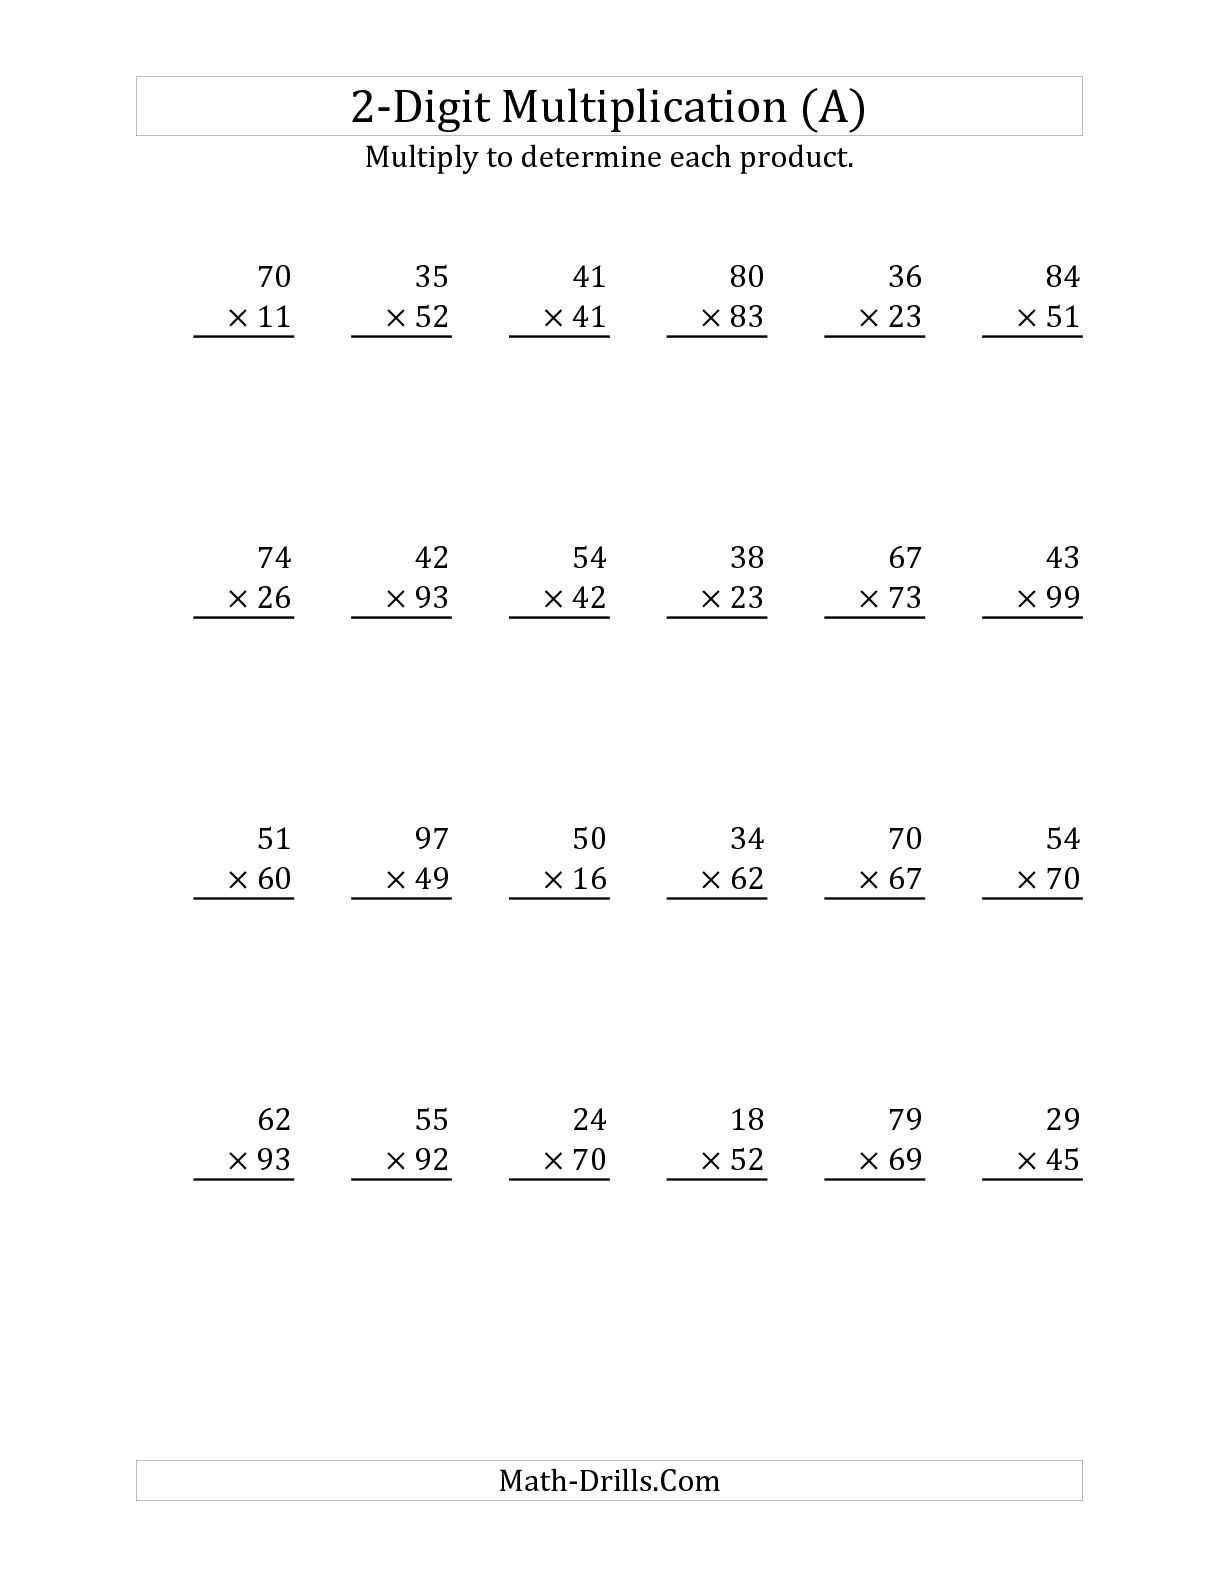 Spanish Lesson Worksheets Also the Multiplying A 2 Digit Number by A 2 Digit Number A Long